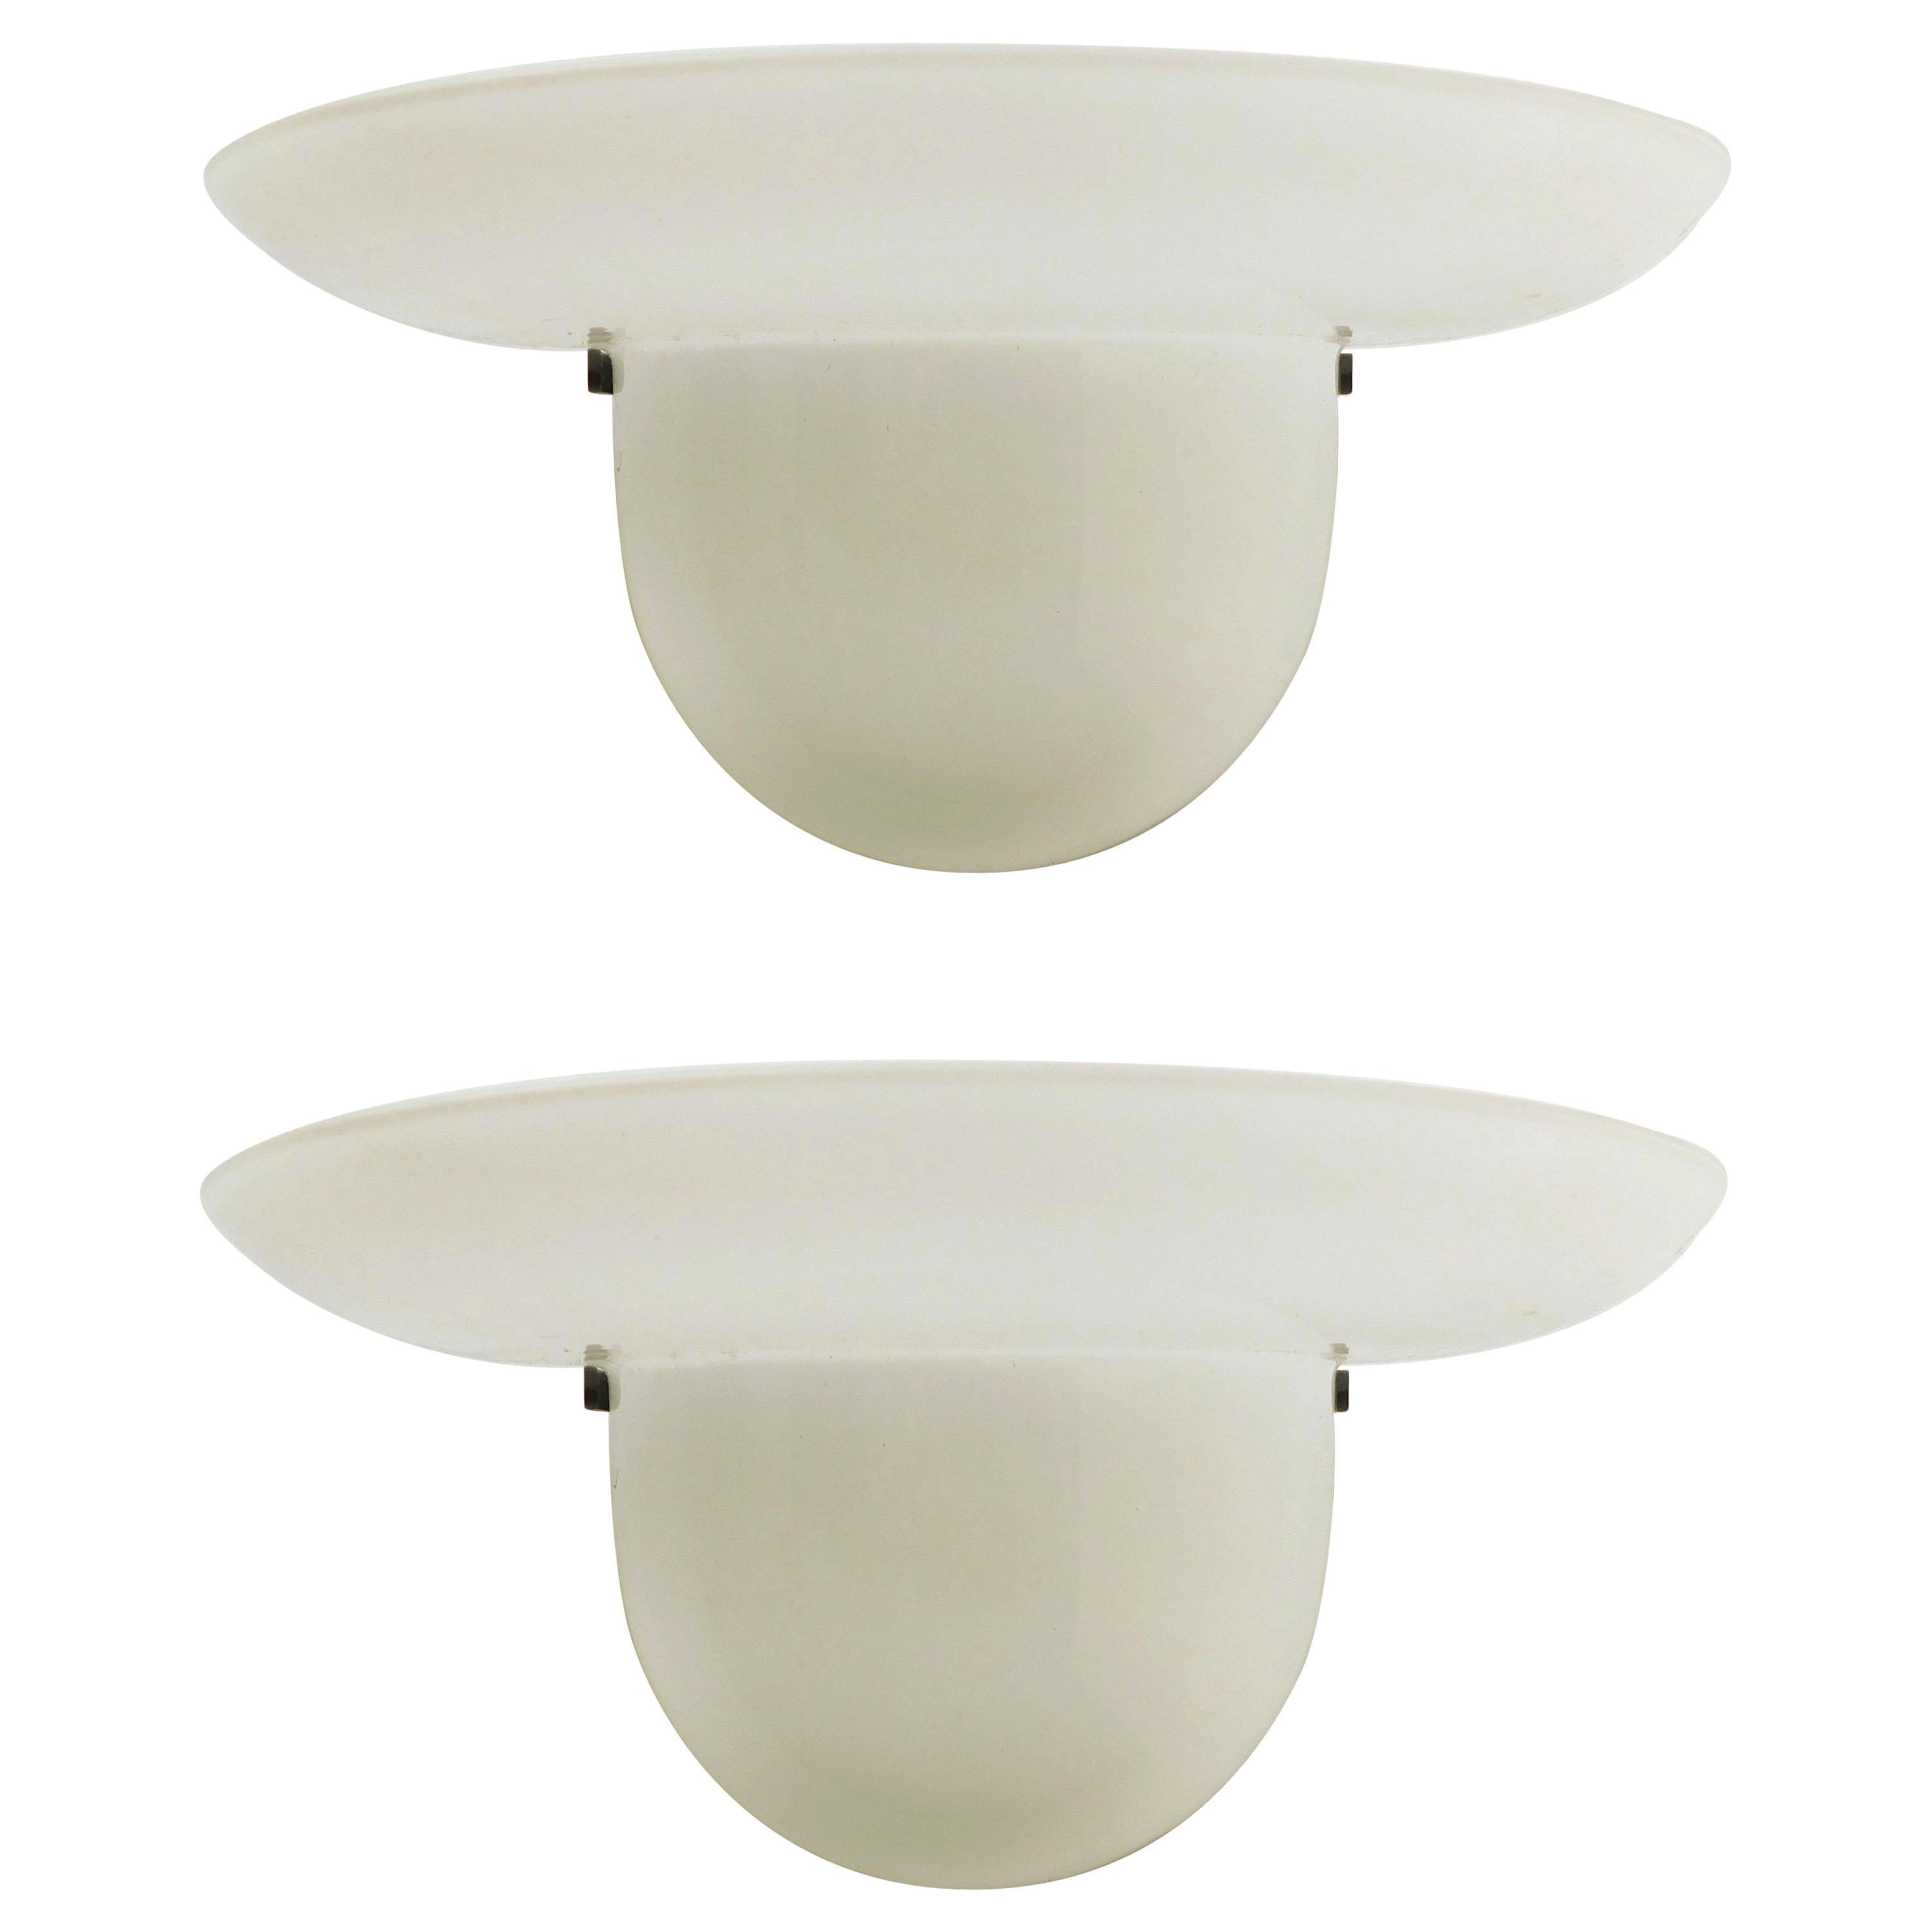 Pair of Uplight Sconces by VeArt